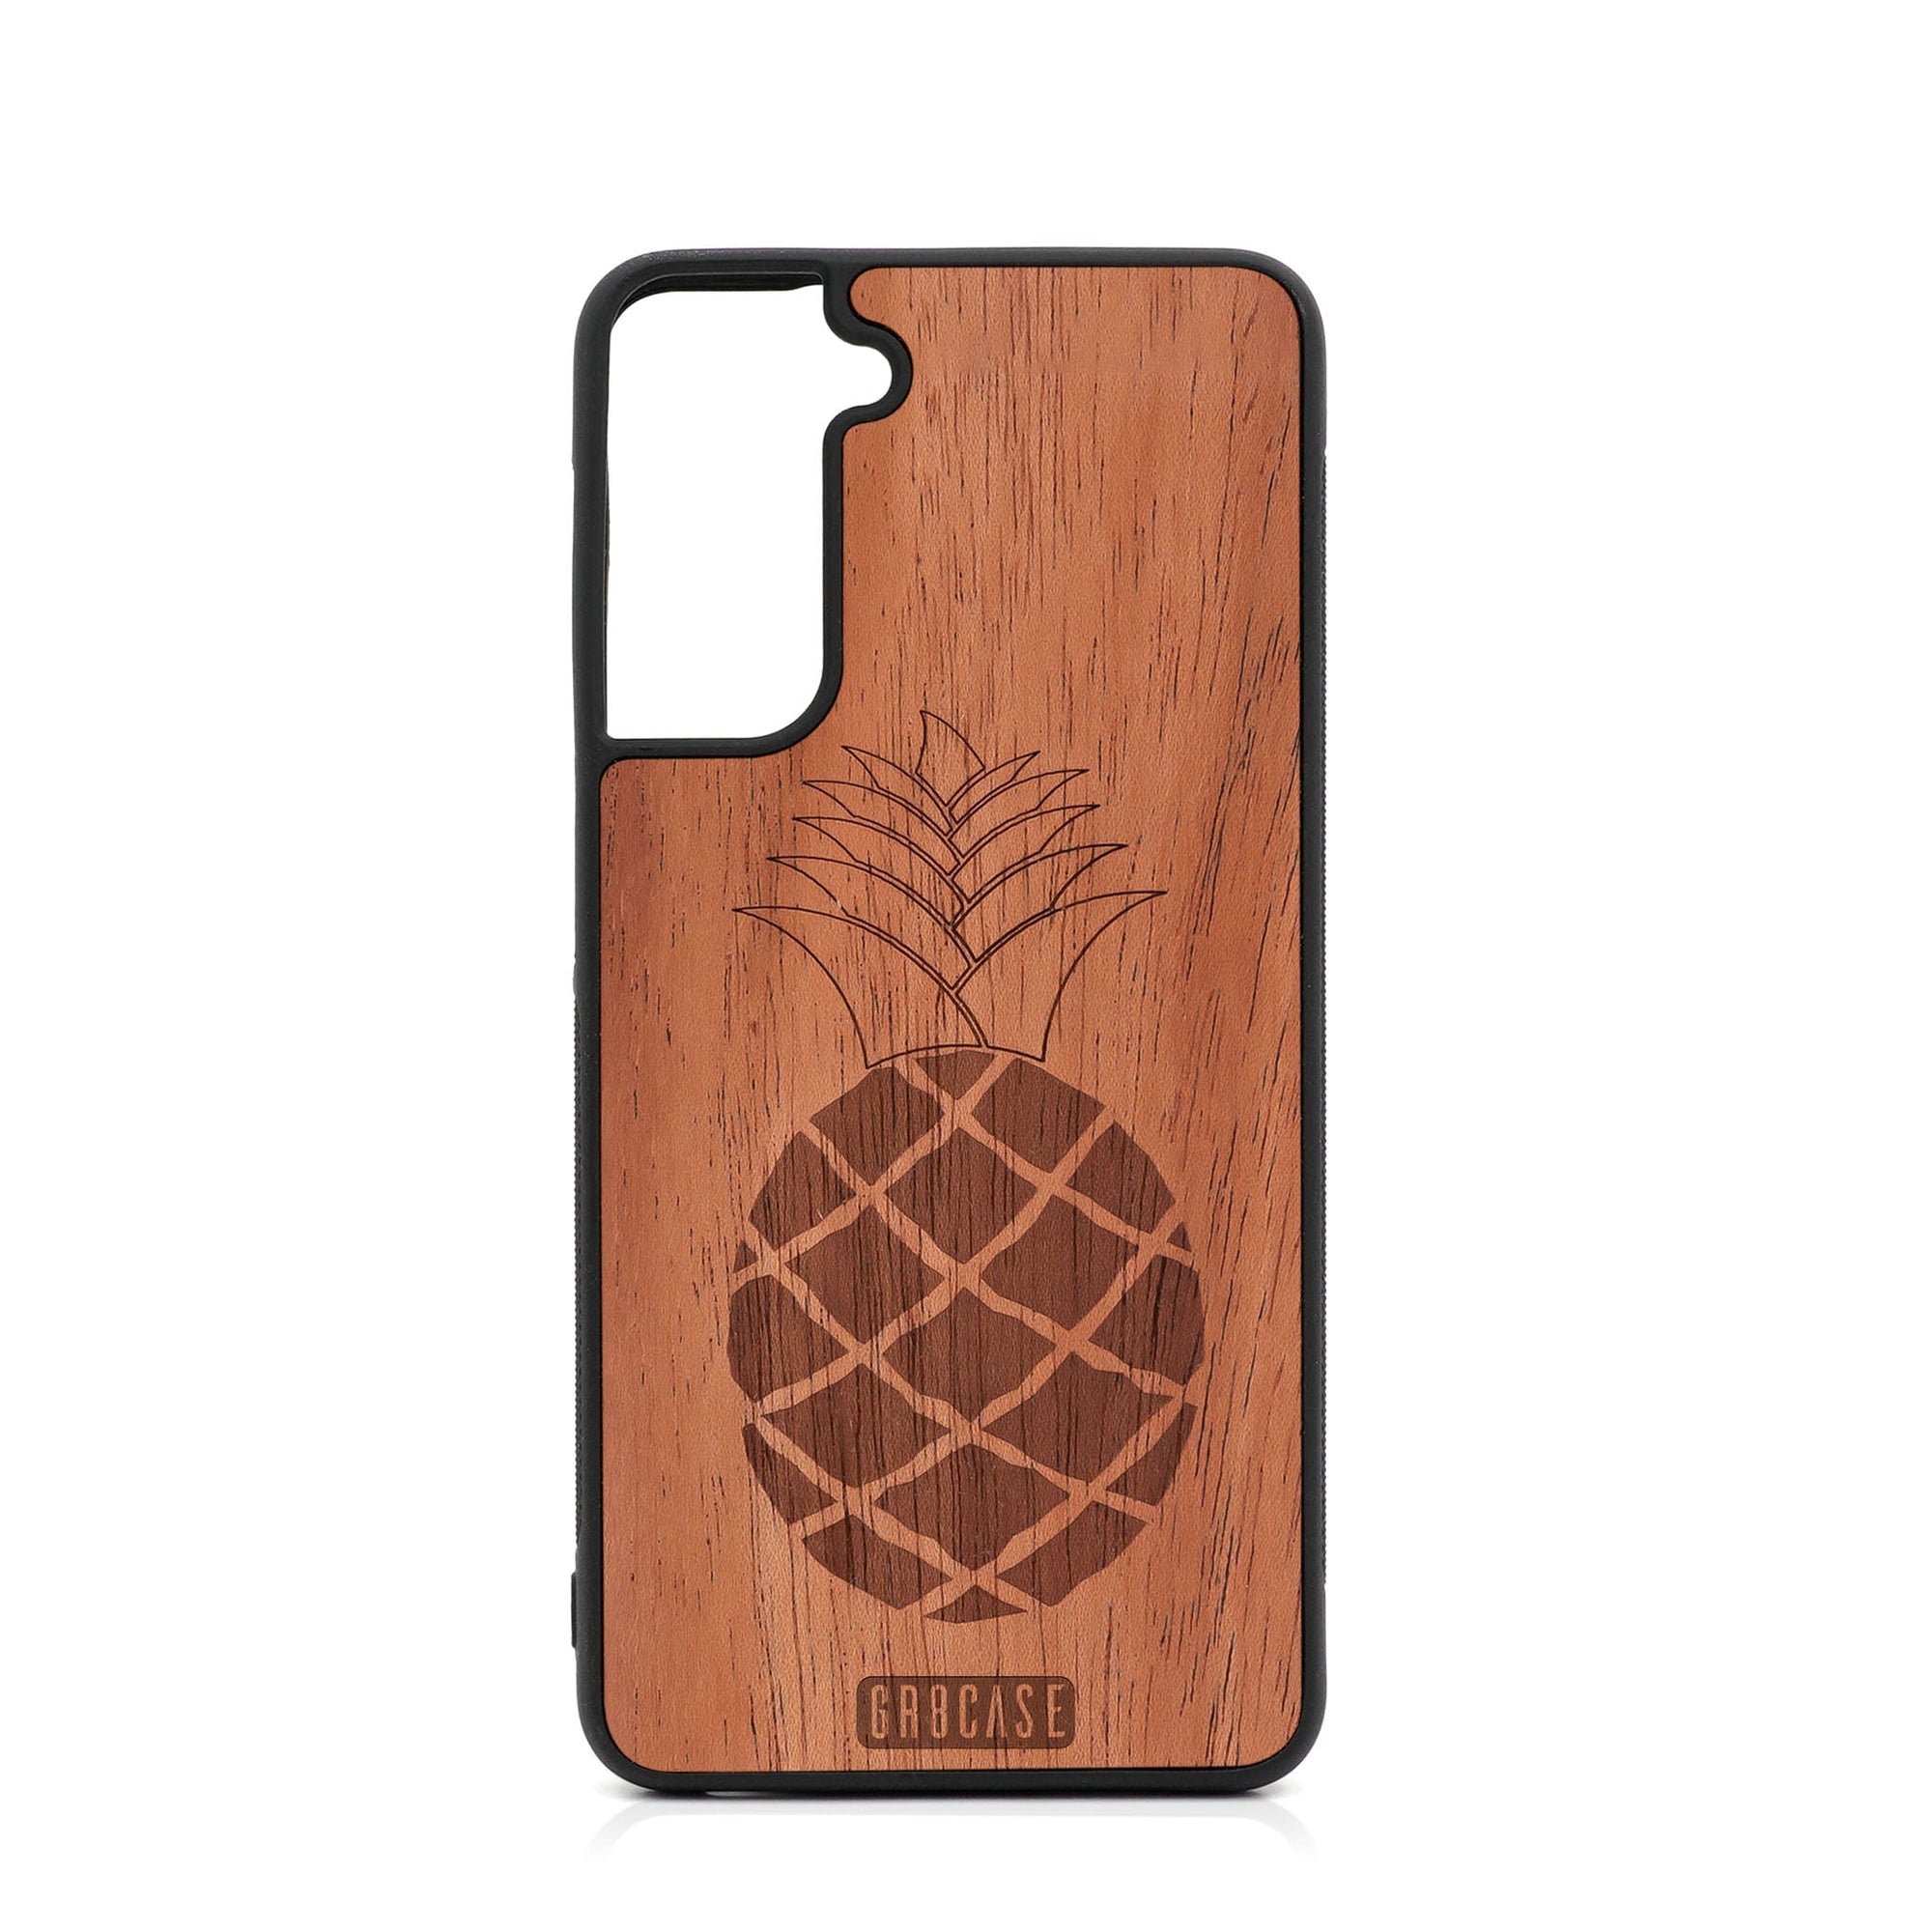 Pineapple Design Wood Case For Samsung Galaxy S21 FE 5G